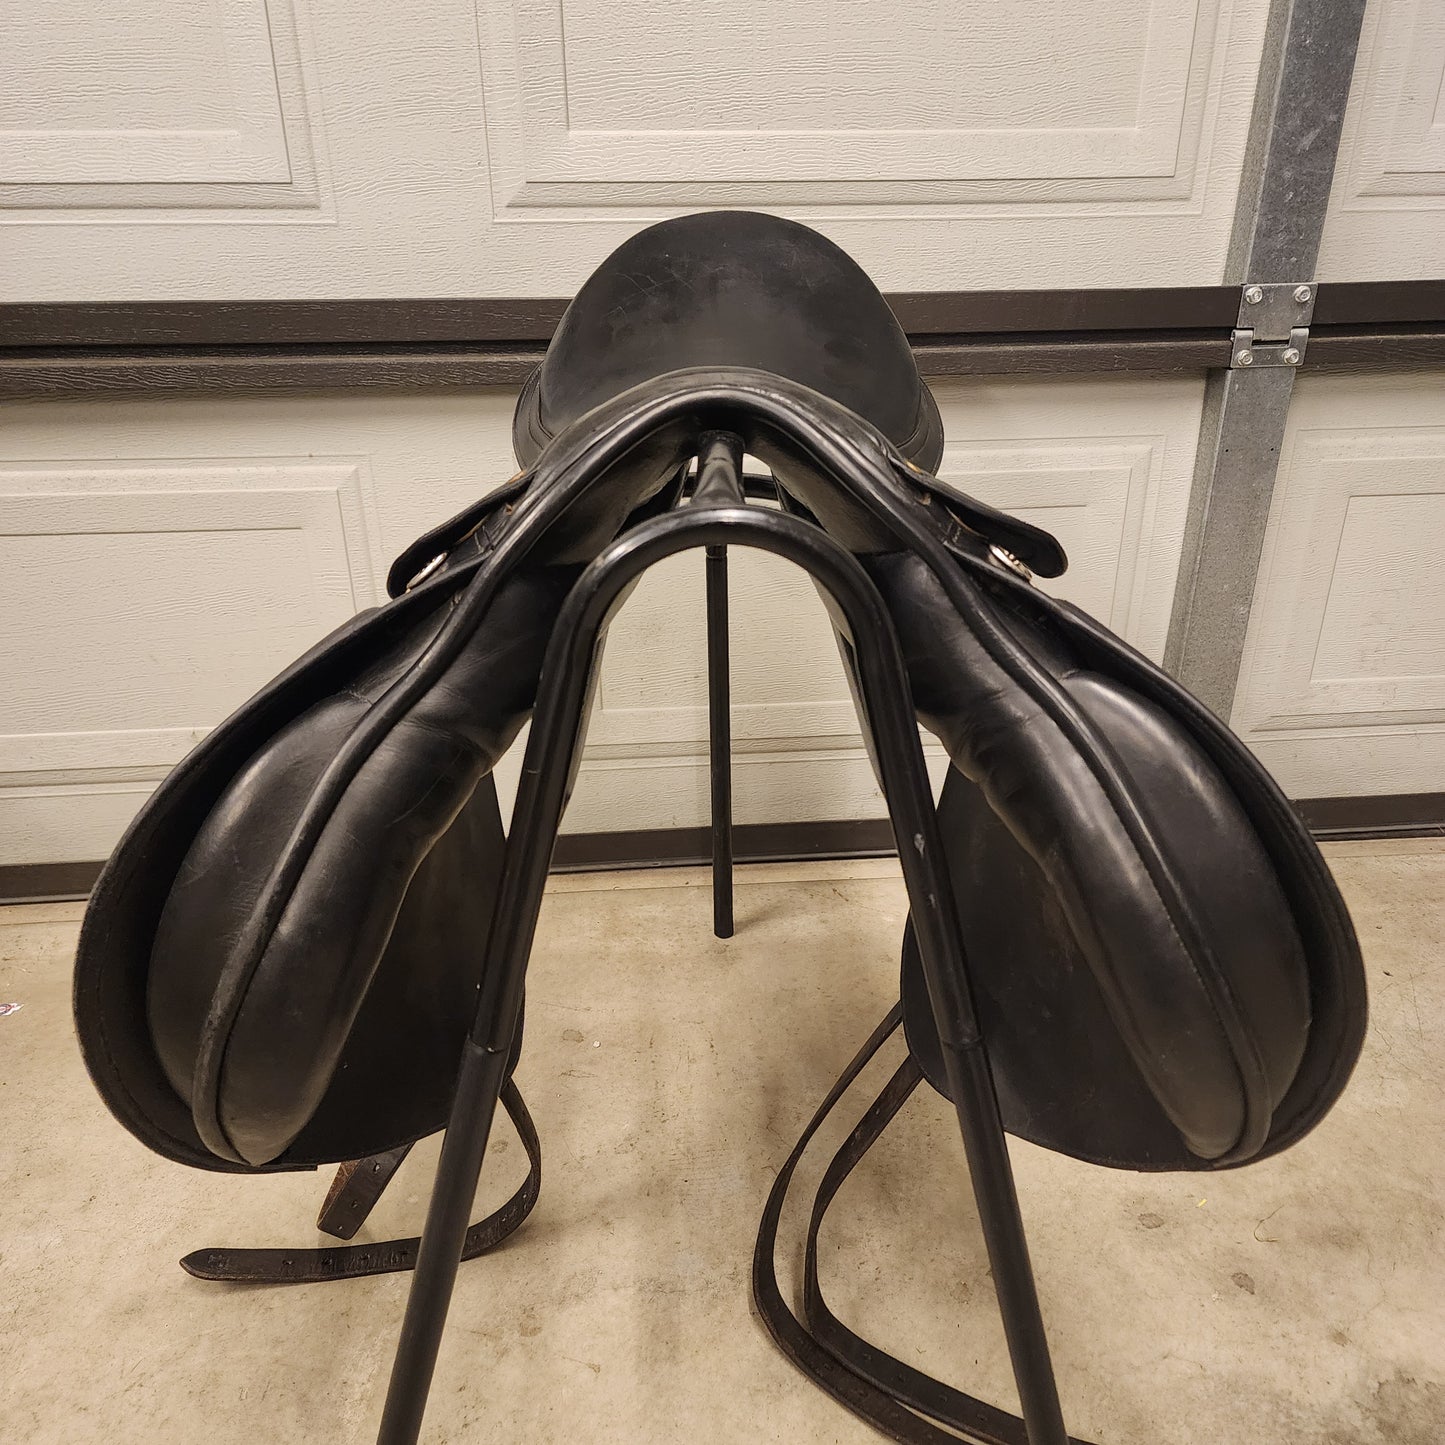 Fenmore Citori black leather GP saddle 18", wide gullet